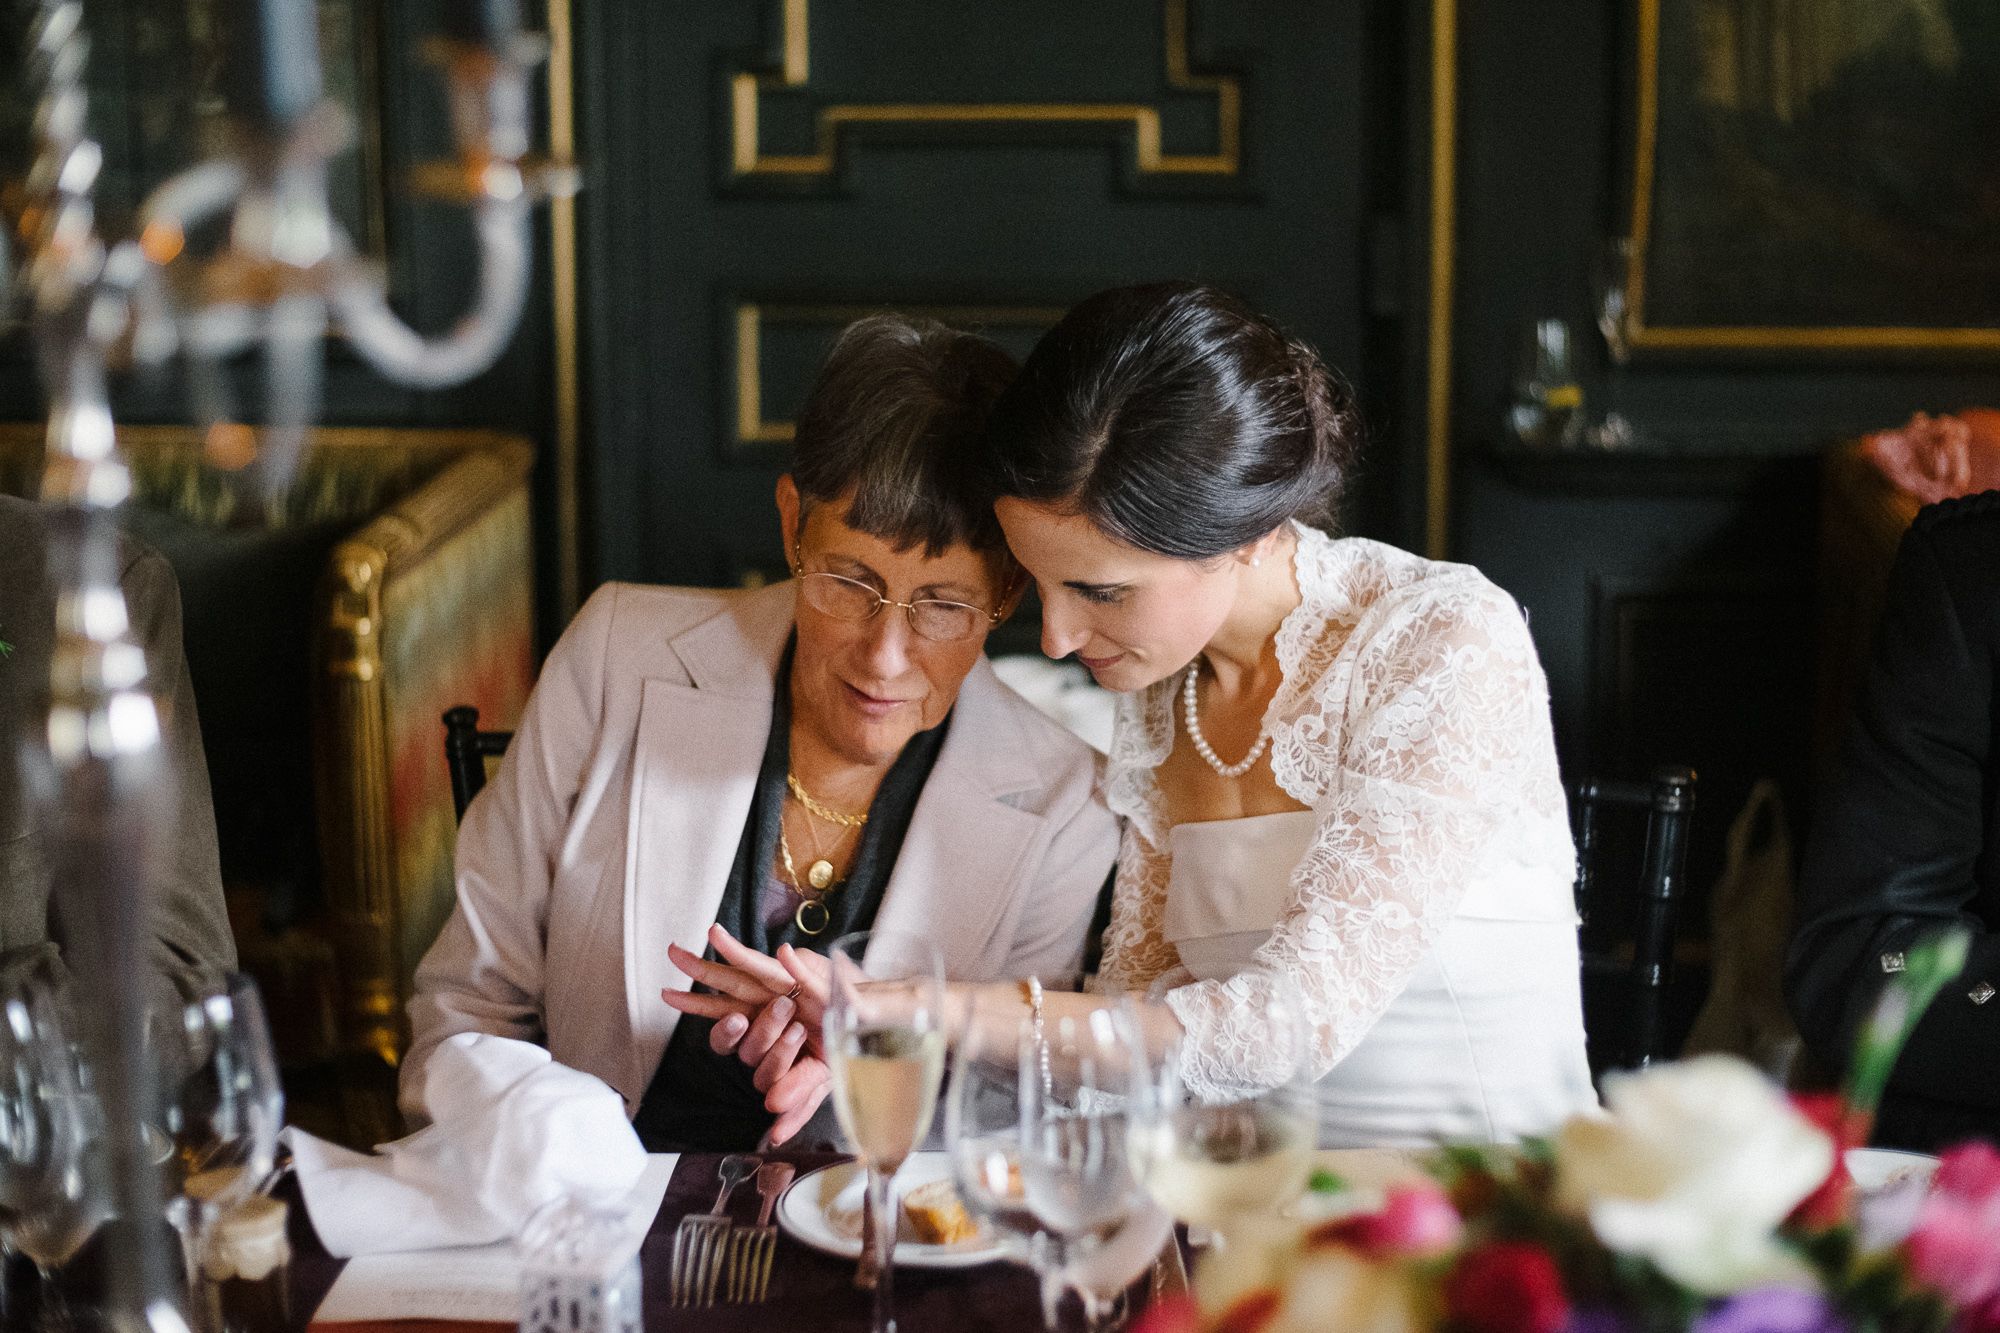 Bride with her mother are looking at wedding rings